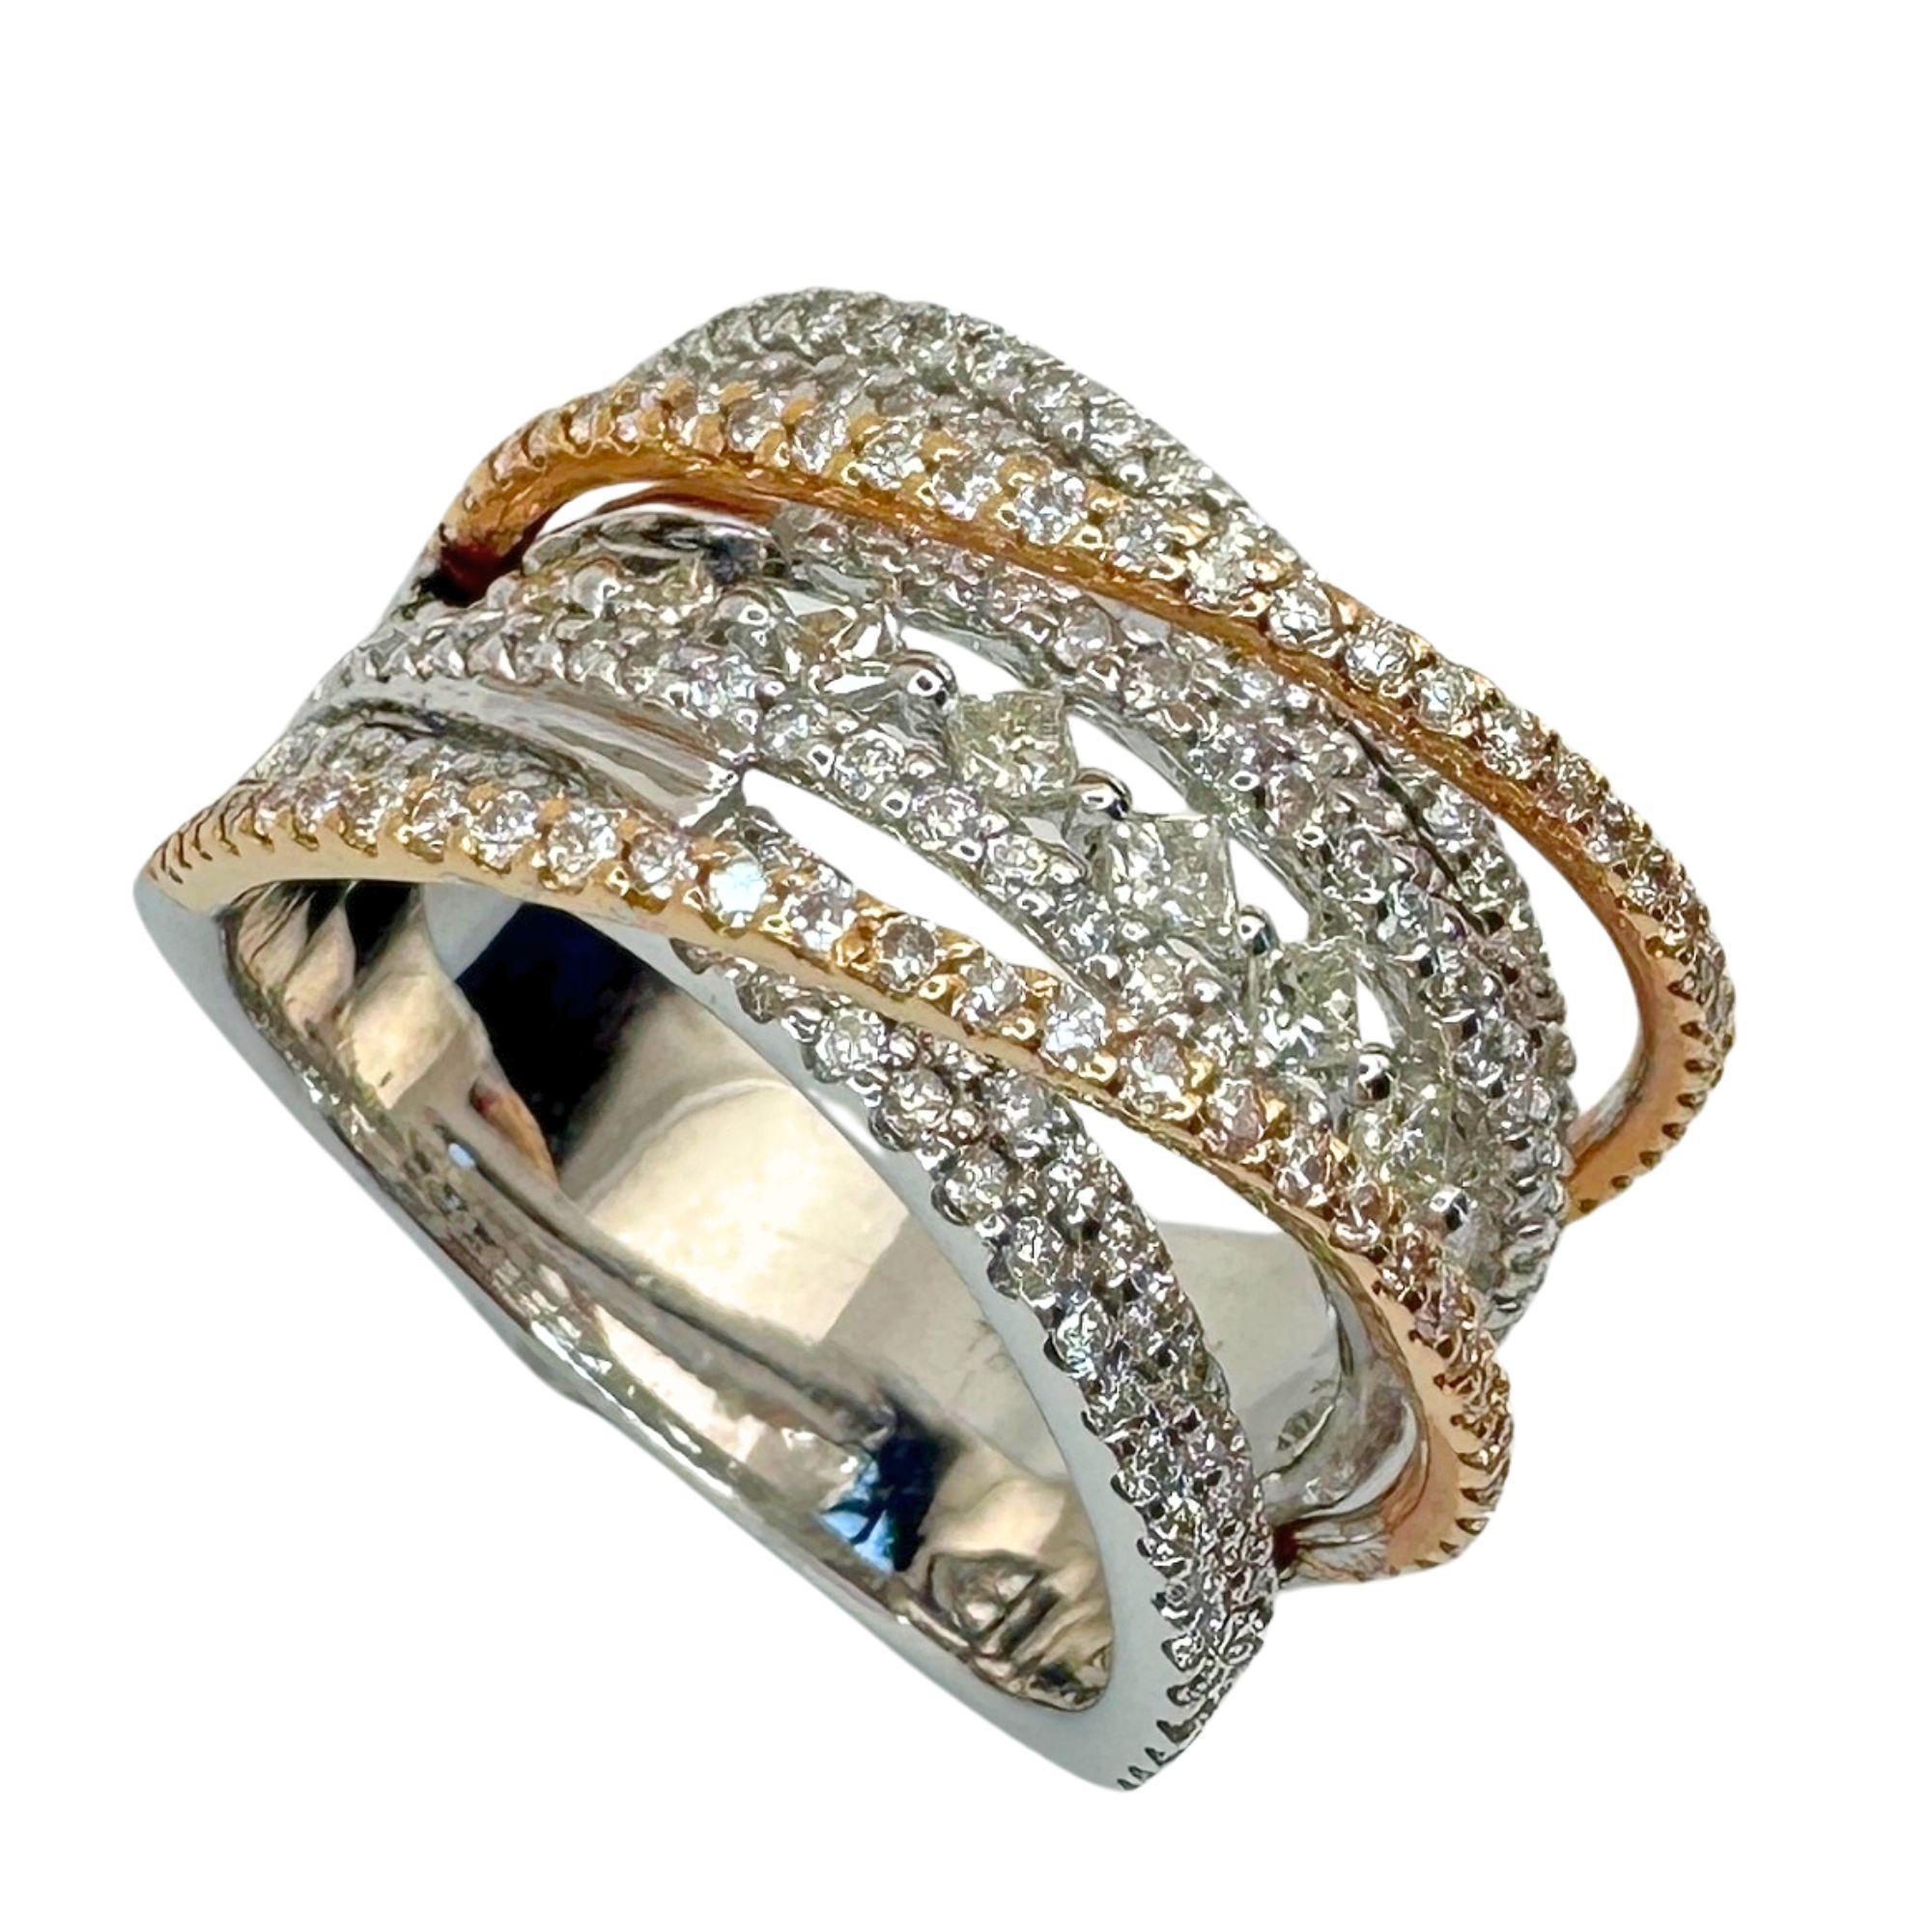 This elegant 18k diamond band ring, with a ring size of 7, boasts a total weight of 1.27 carats. The stunning row of princess cut diamonds in the middle, weighs 0.32 carats in total, is complemented by 0.95 carats of round cut diamonds all around.